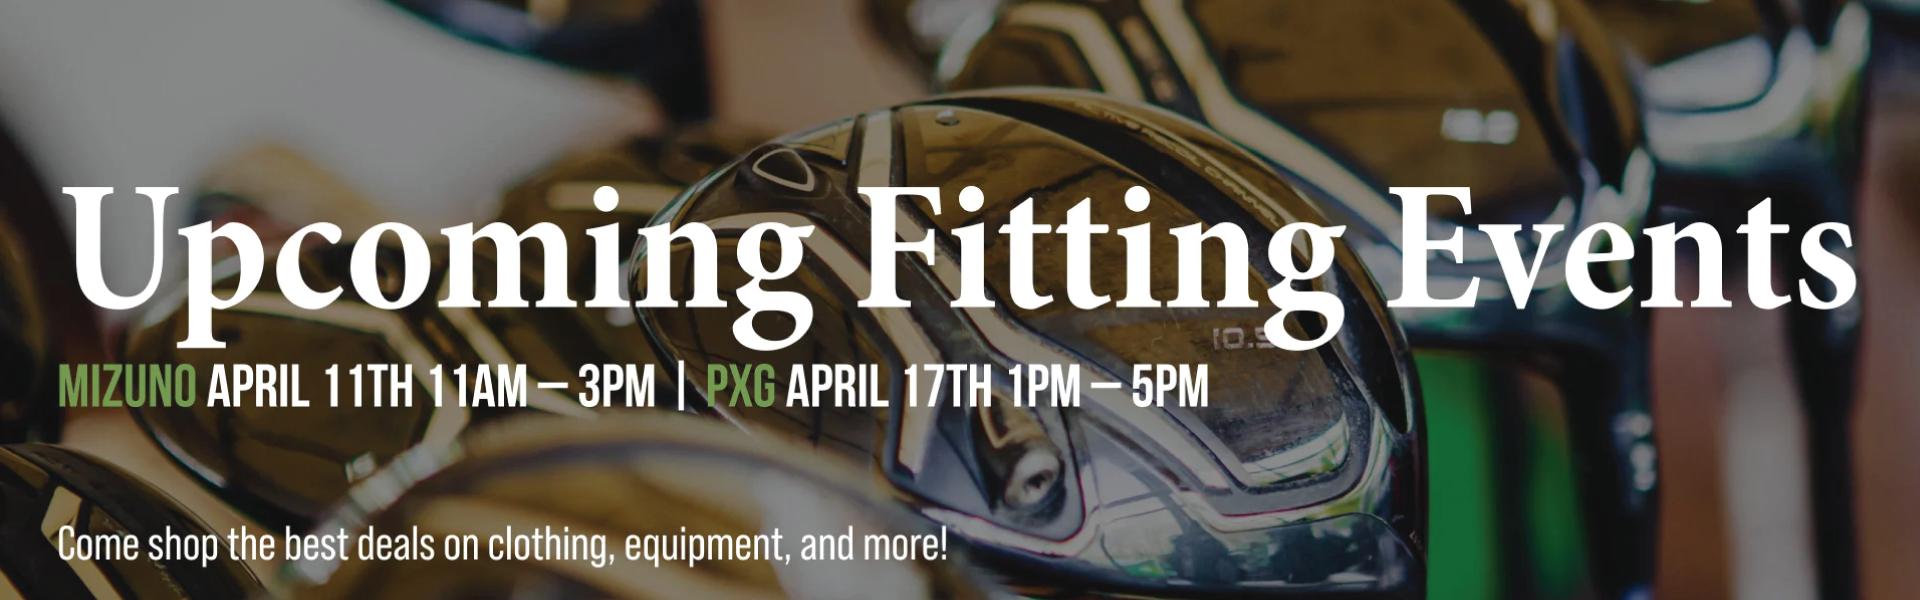 club fitting event banner